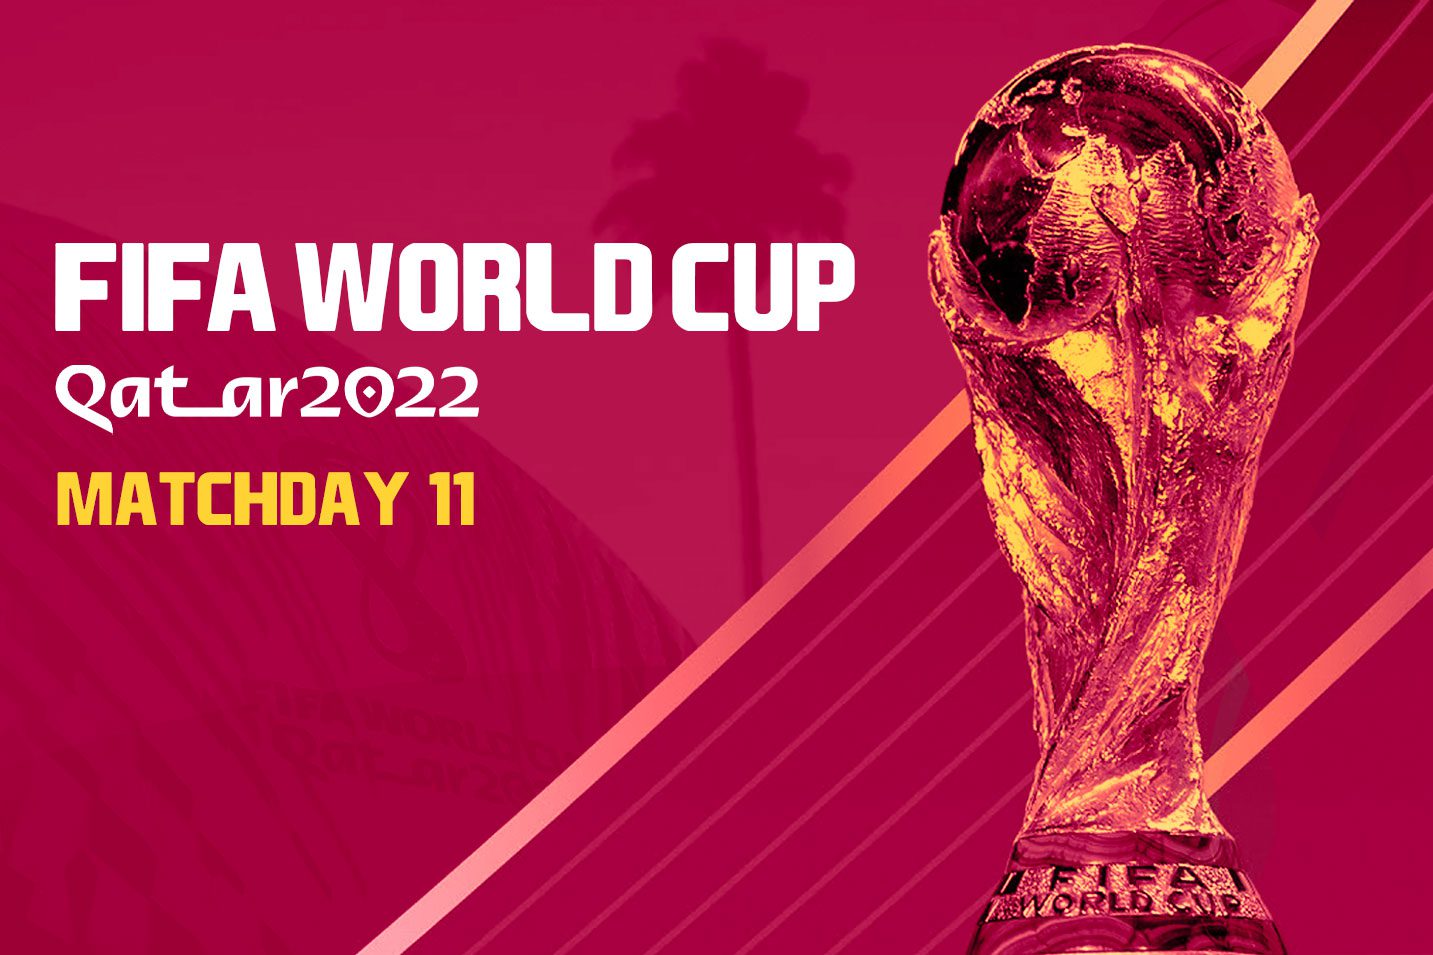 2022 World Cup Matchday 11 preview